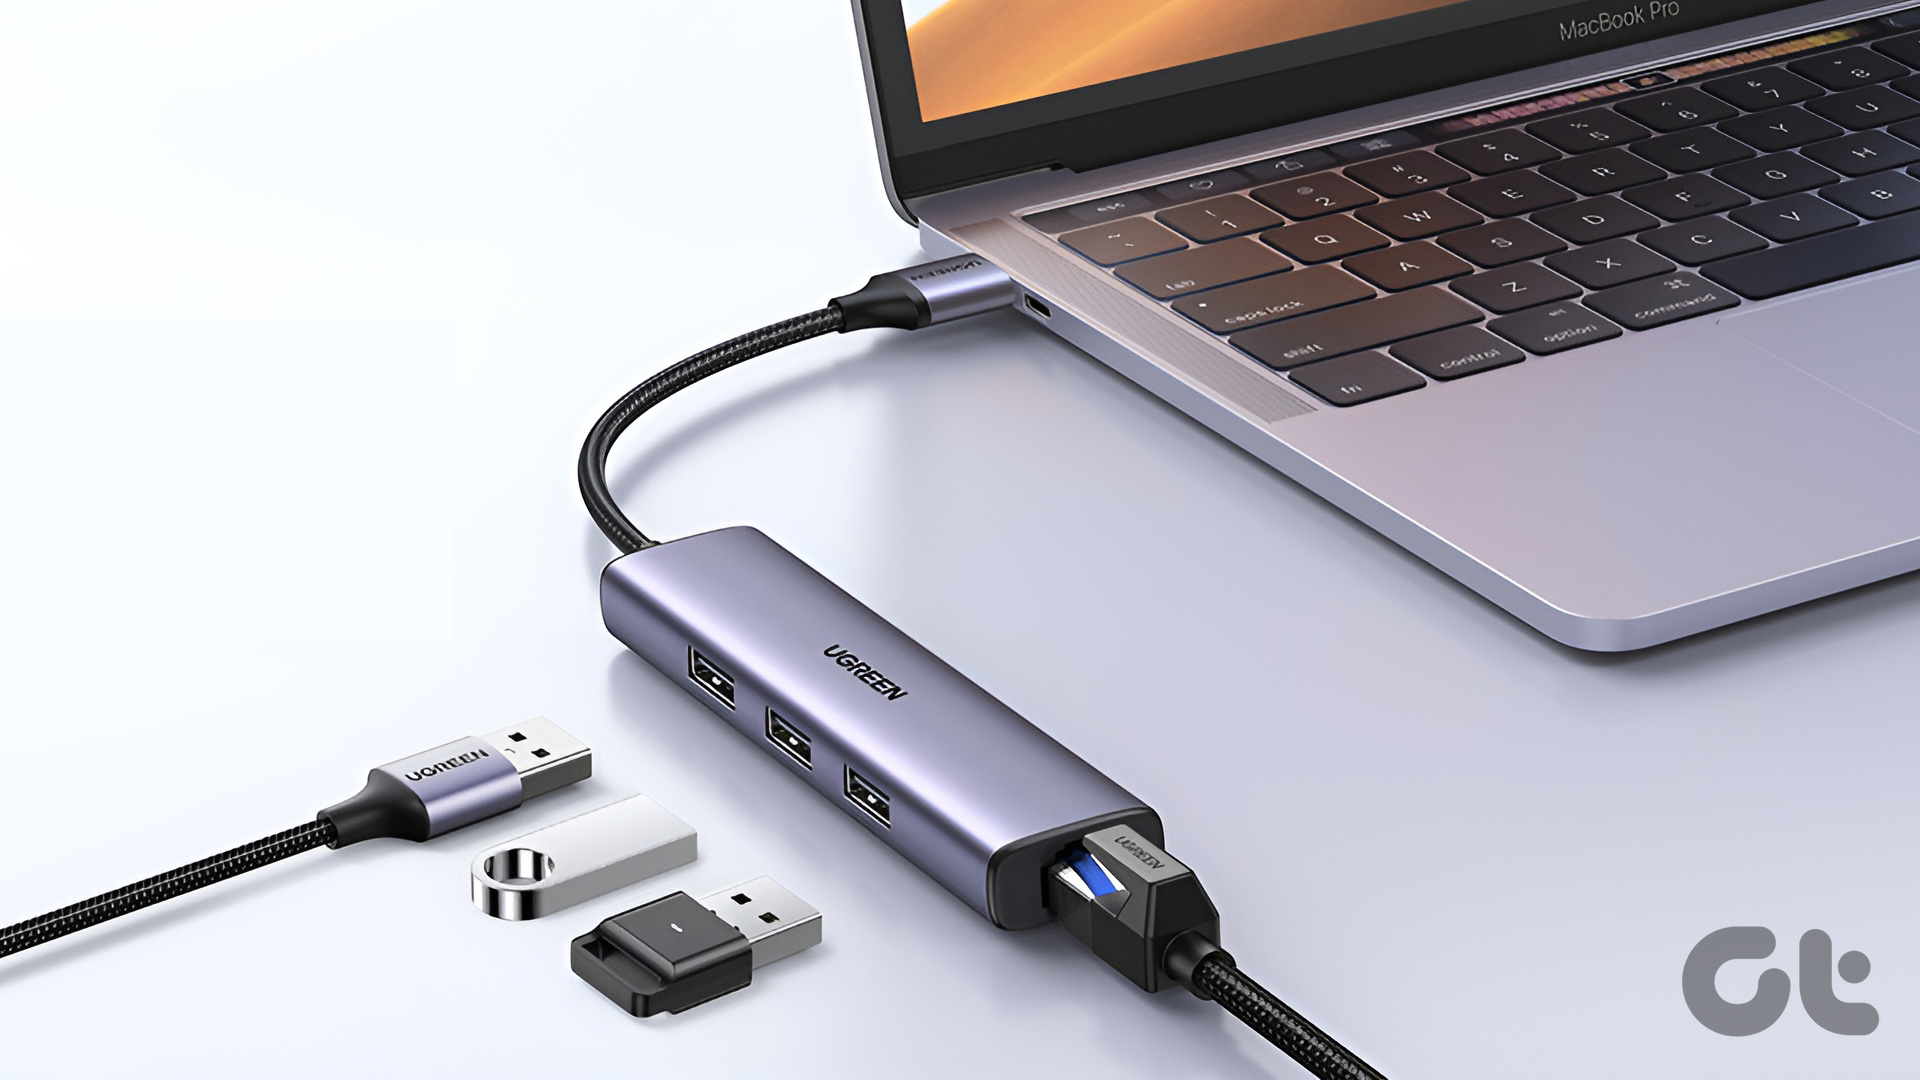 ballet chokolade kreativ 7 Best USB to Ethernet Adapters for Laptops and MacBooks